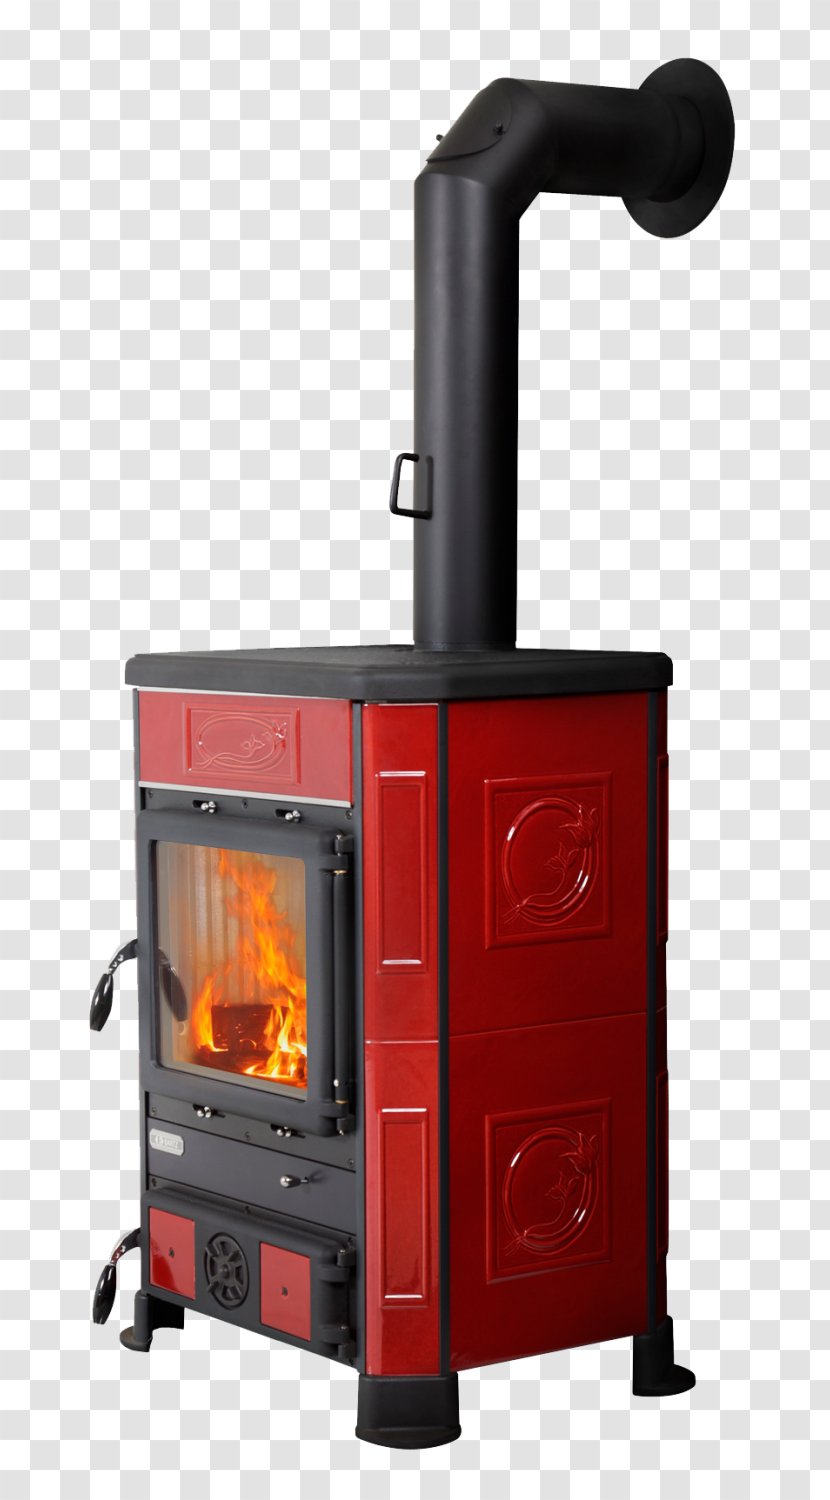 Wood Stoves Kaminofen Ceramic Fireplace - Hearth - Stove Transparent PNG